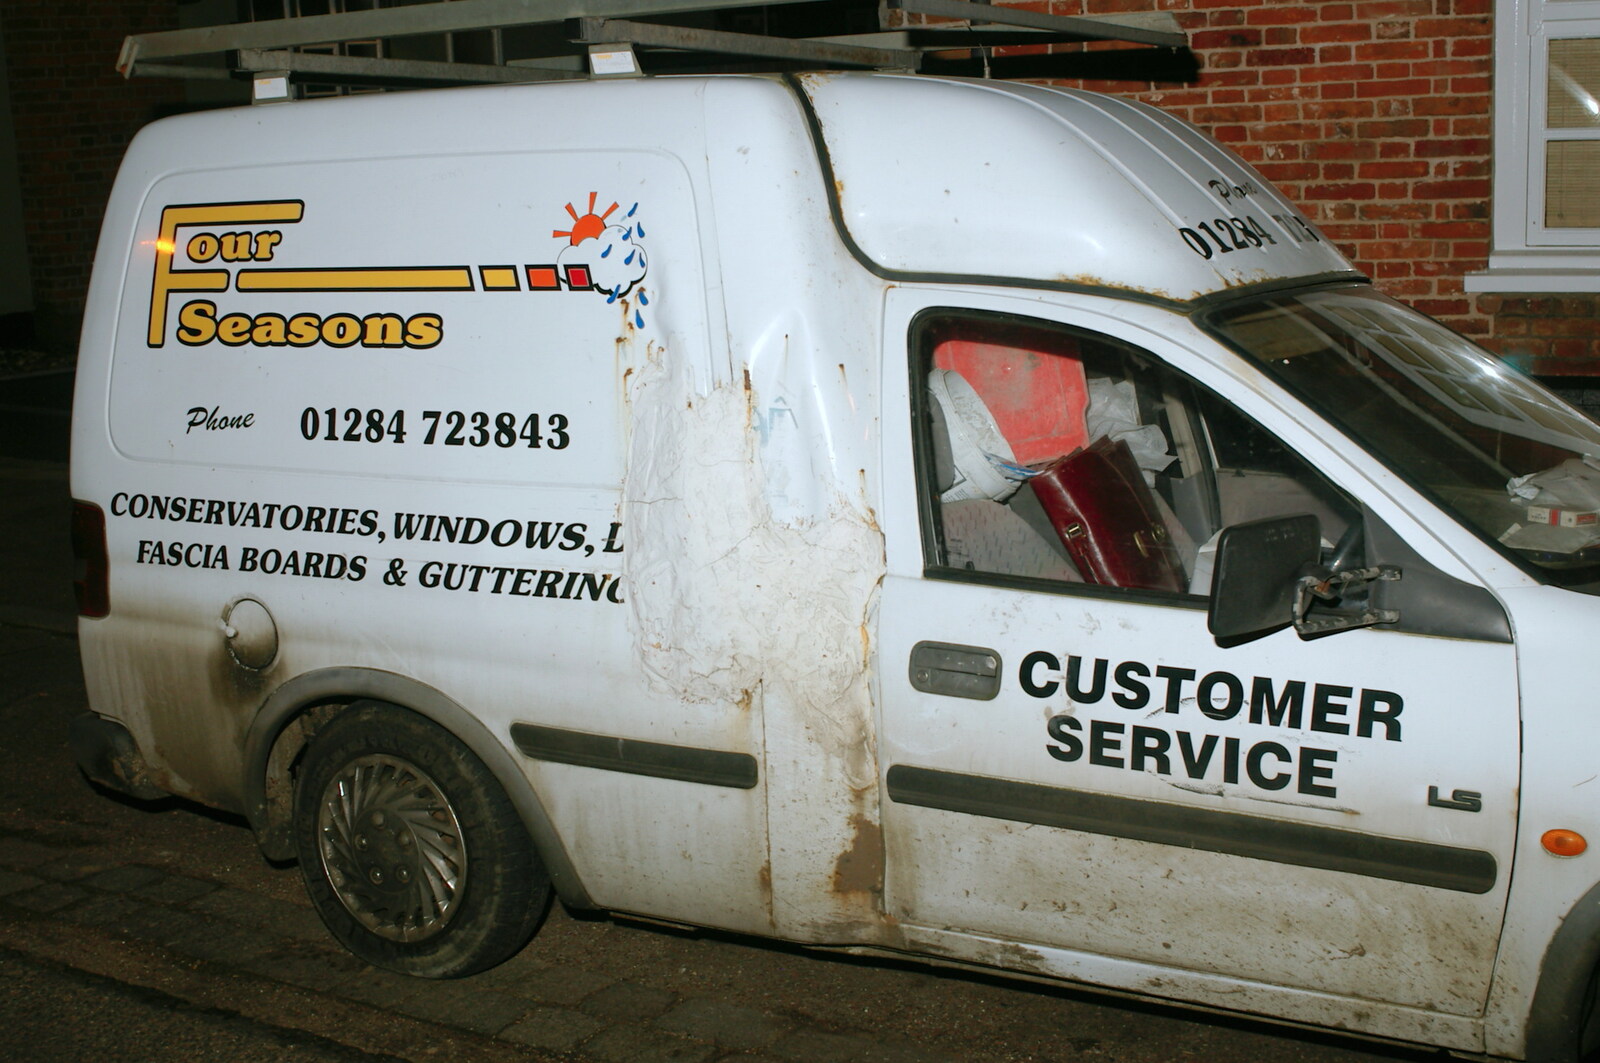 An extreme example of body filler in a van from Tsunami-Aid at the Greyhound, Botesdale, Suffolk - 5th February 2005